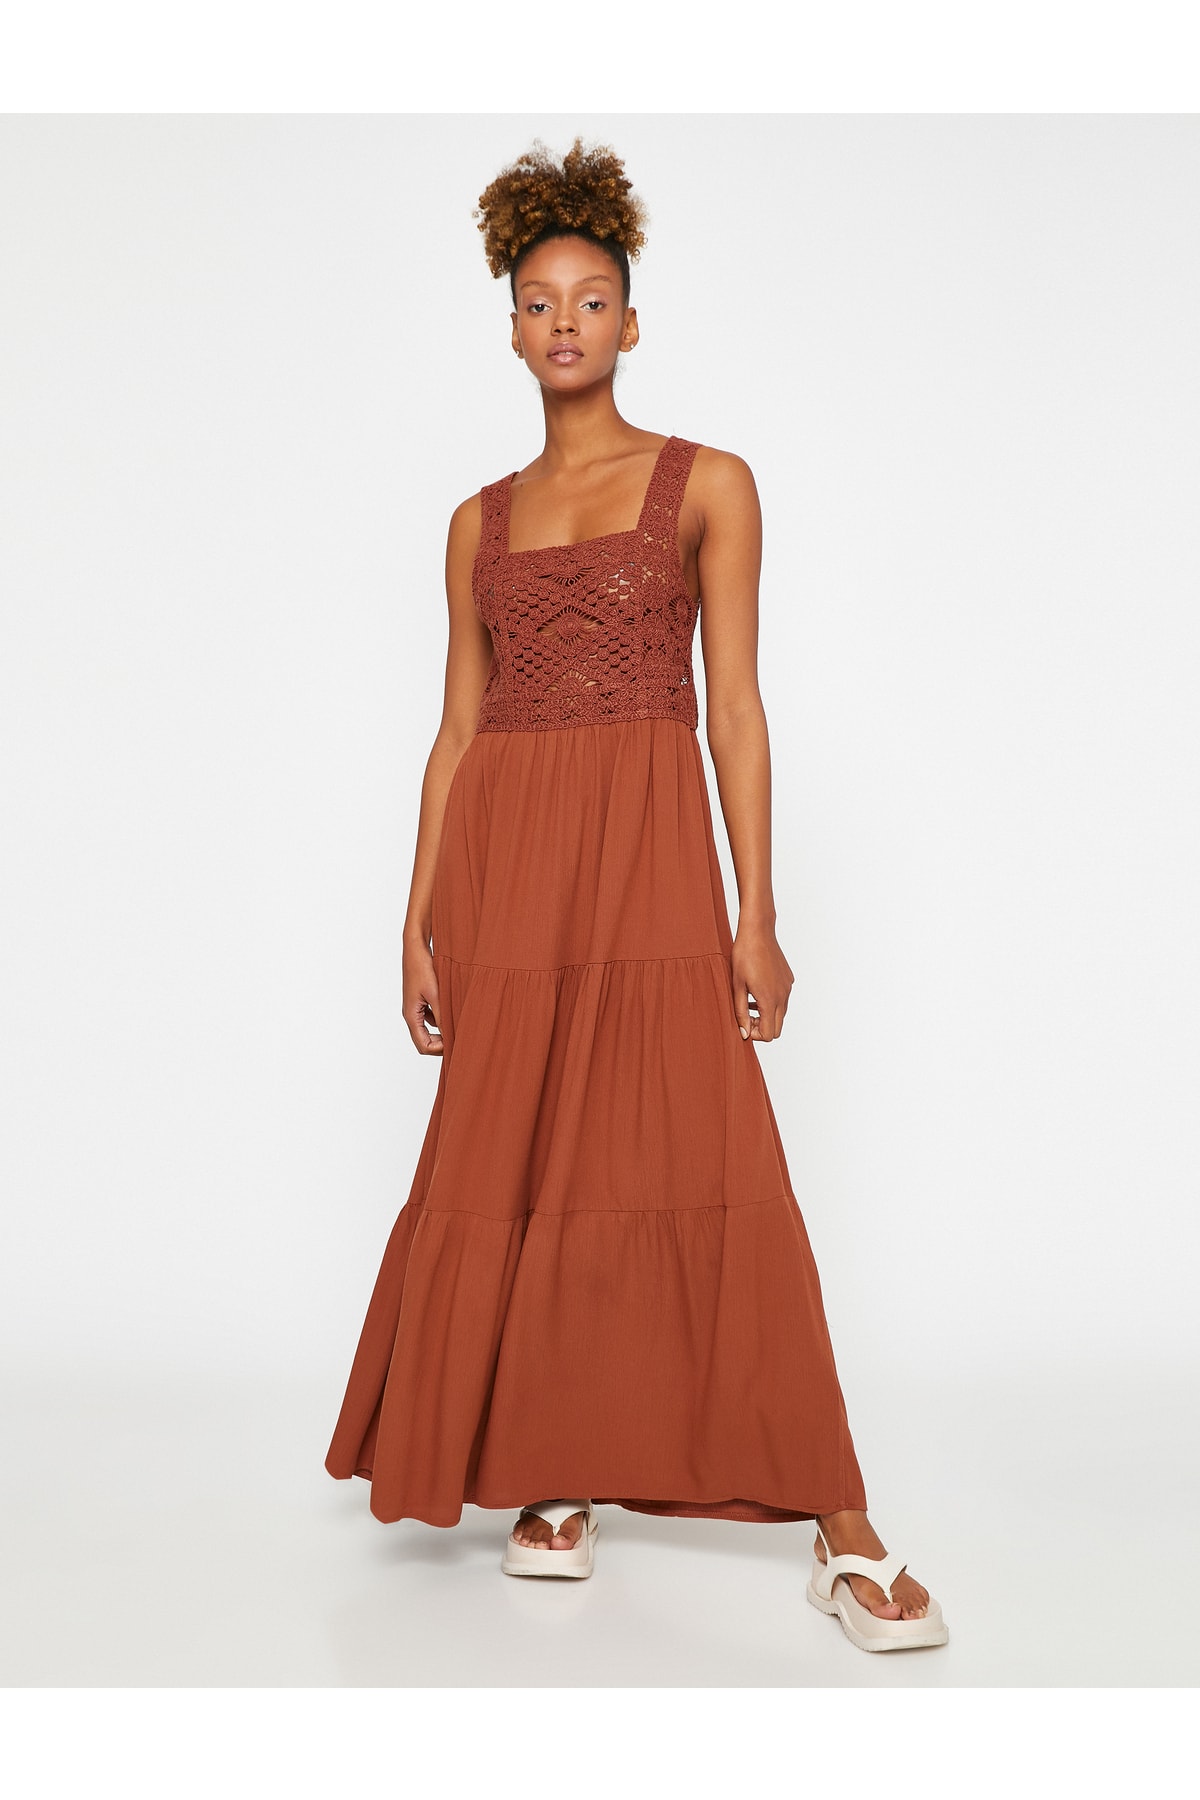 Koton Long Dress with Crochet Detail and Straps Square Neck